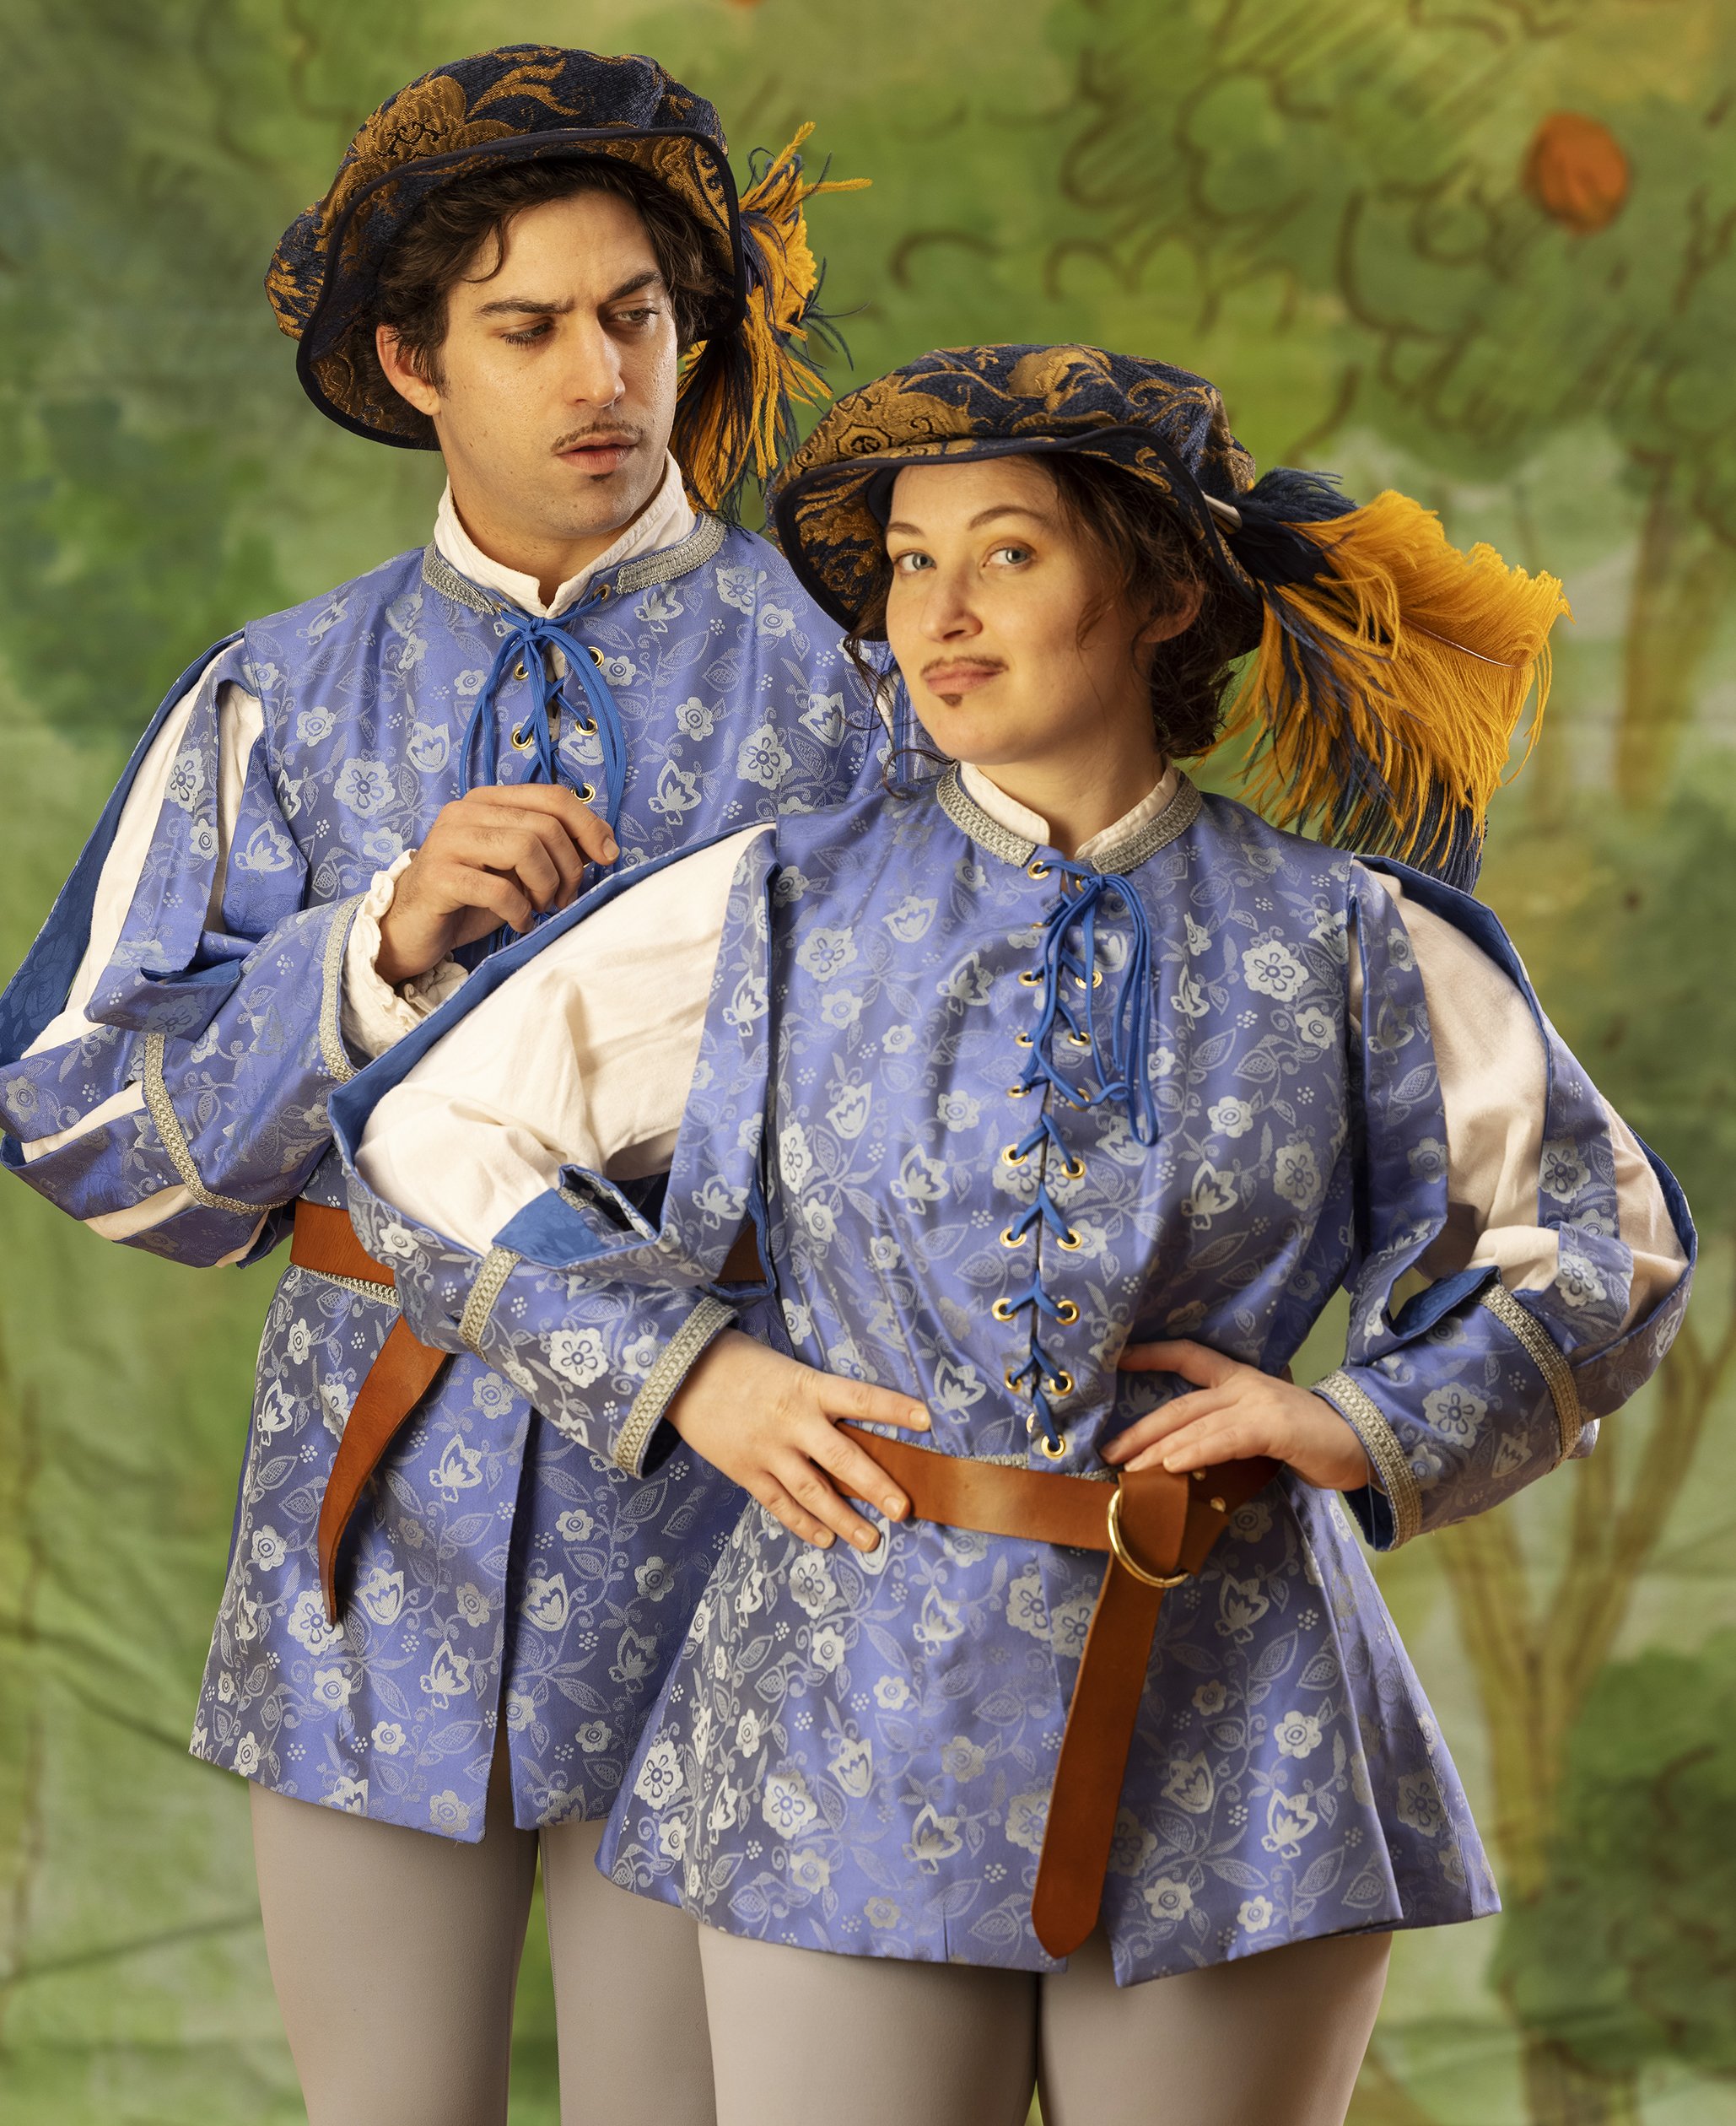 Bryn Booth as Viola and Hunter Hnat as Sebastian in Twelfth Night. Photo by Tim Fuller.